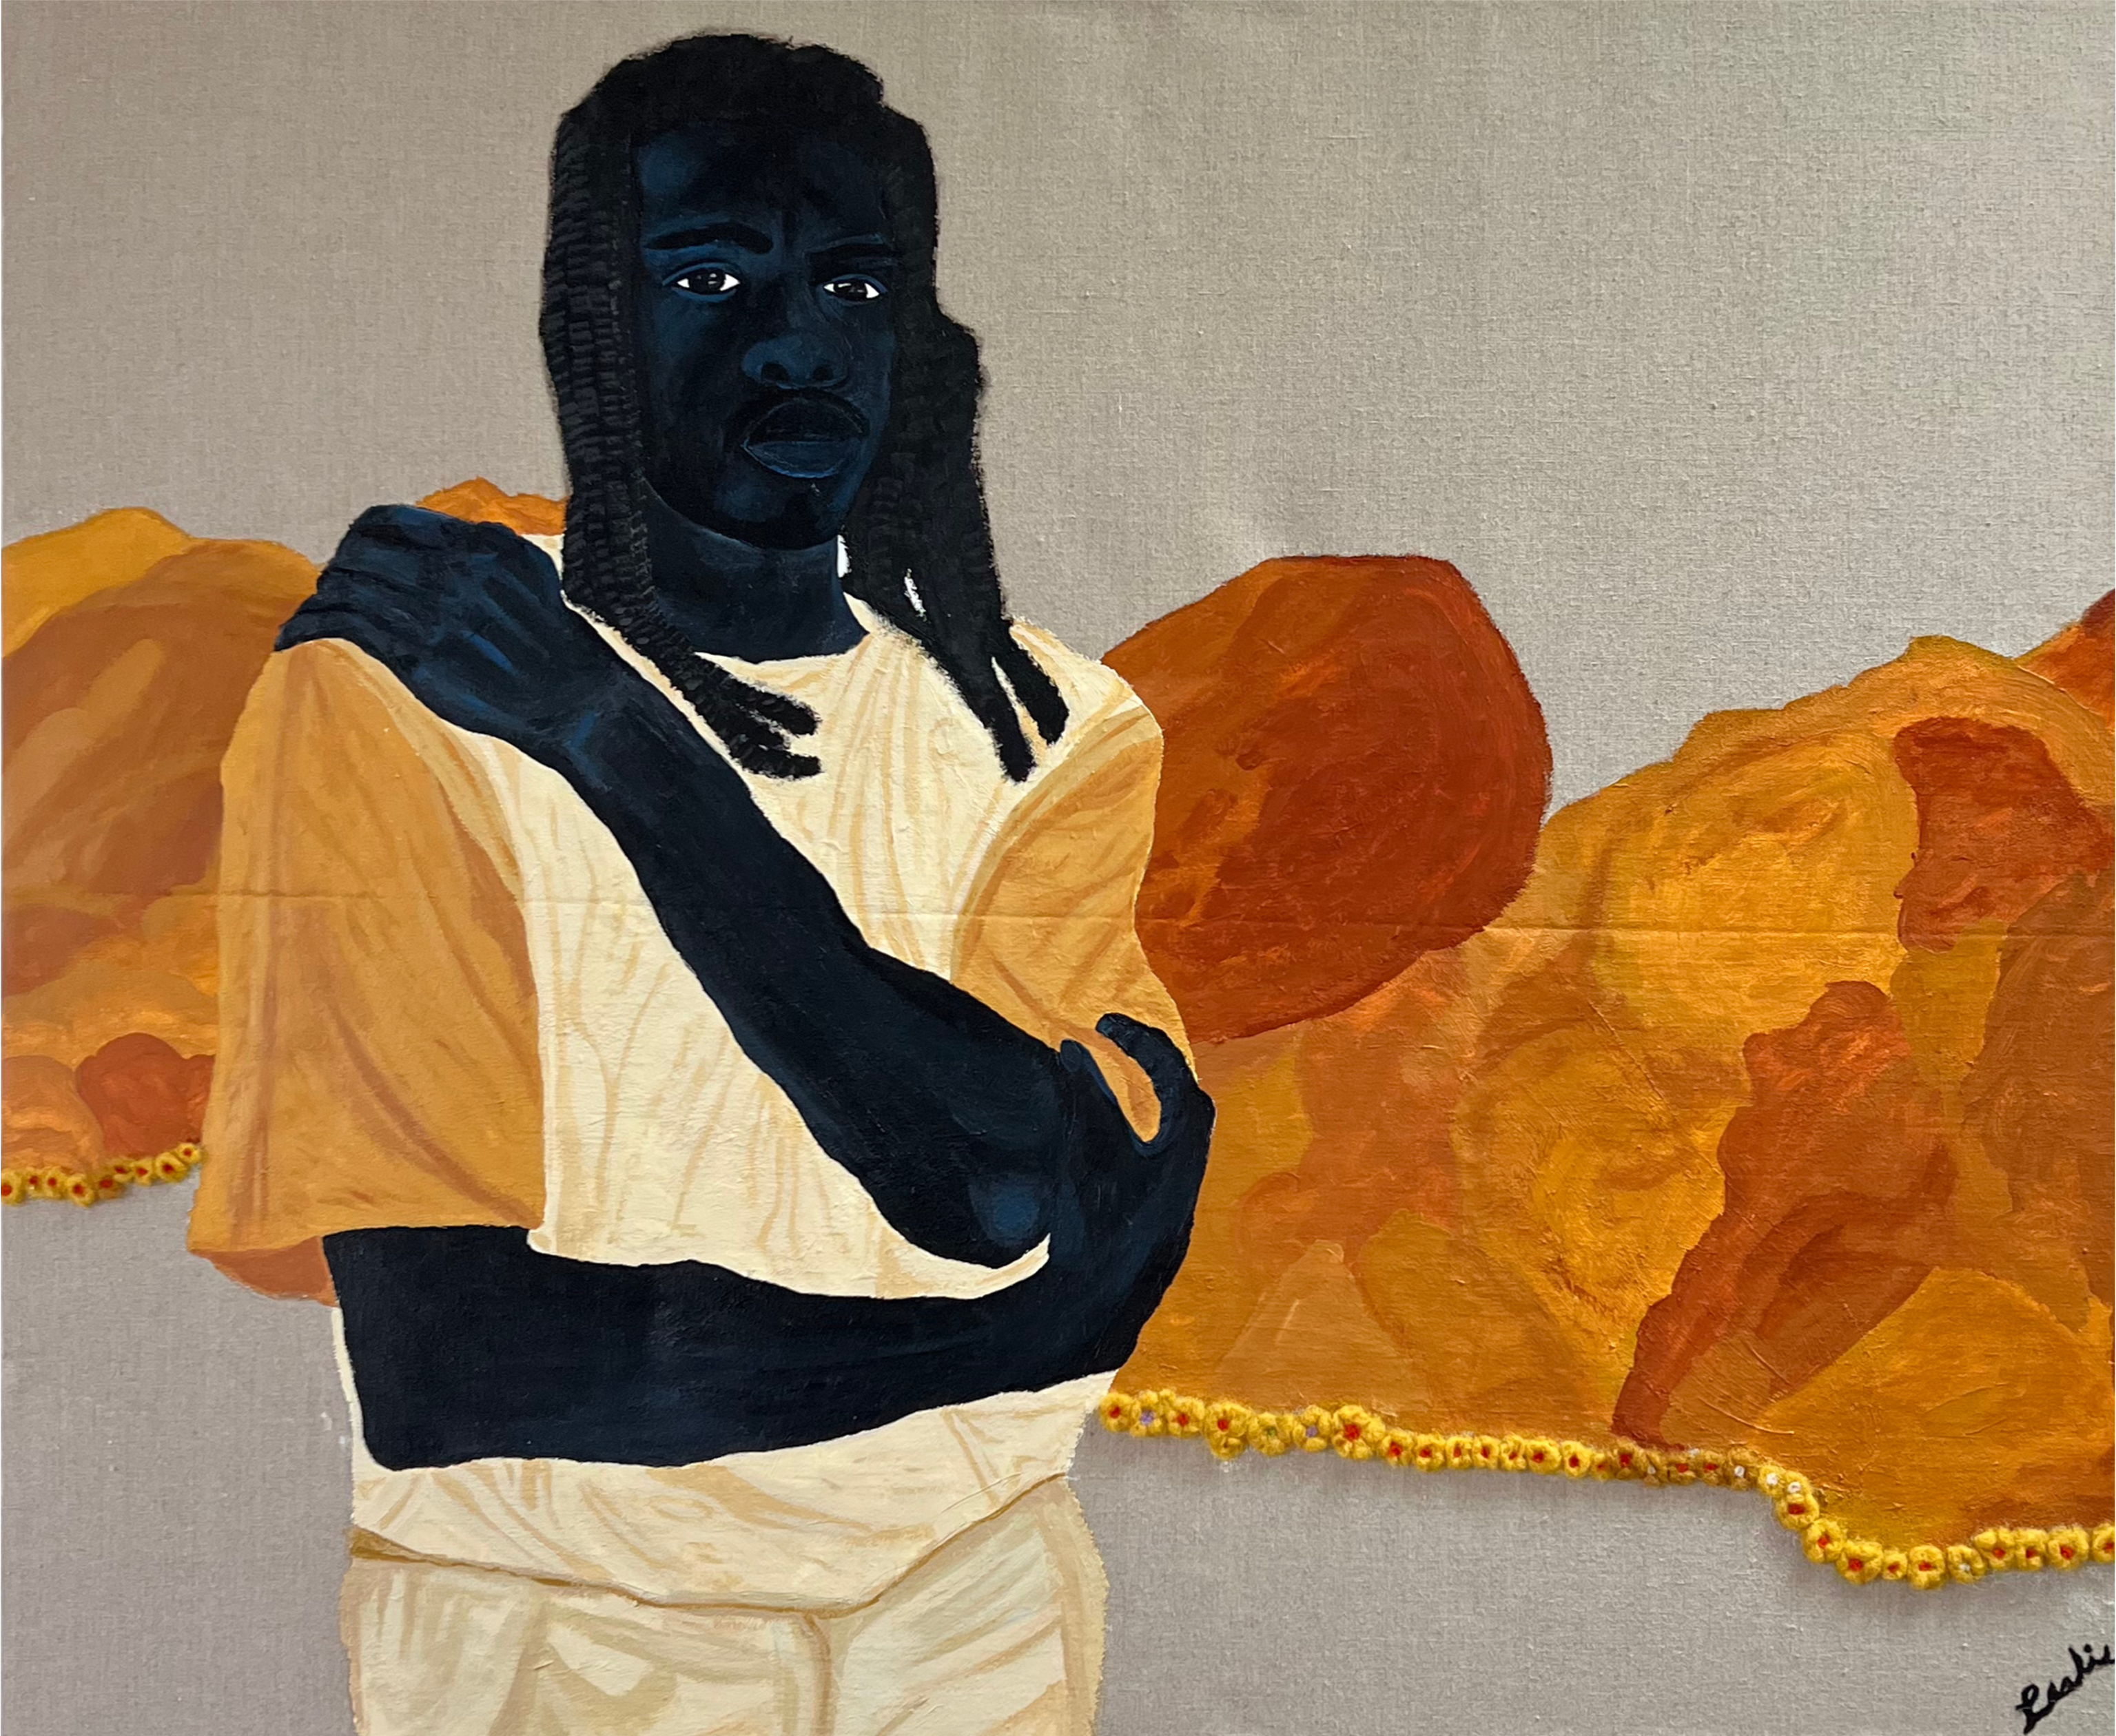 A painting of a Black male with dreads hugging himself wearing a beige and orange shirt. The background has orange pain on canvas.